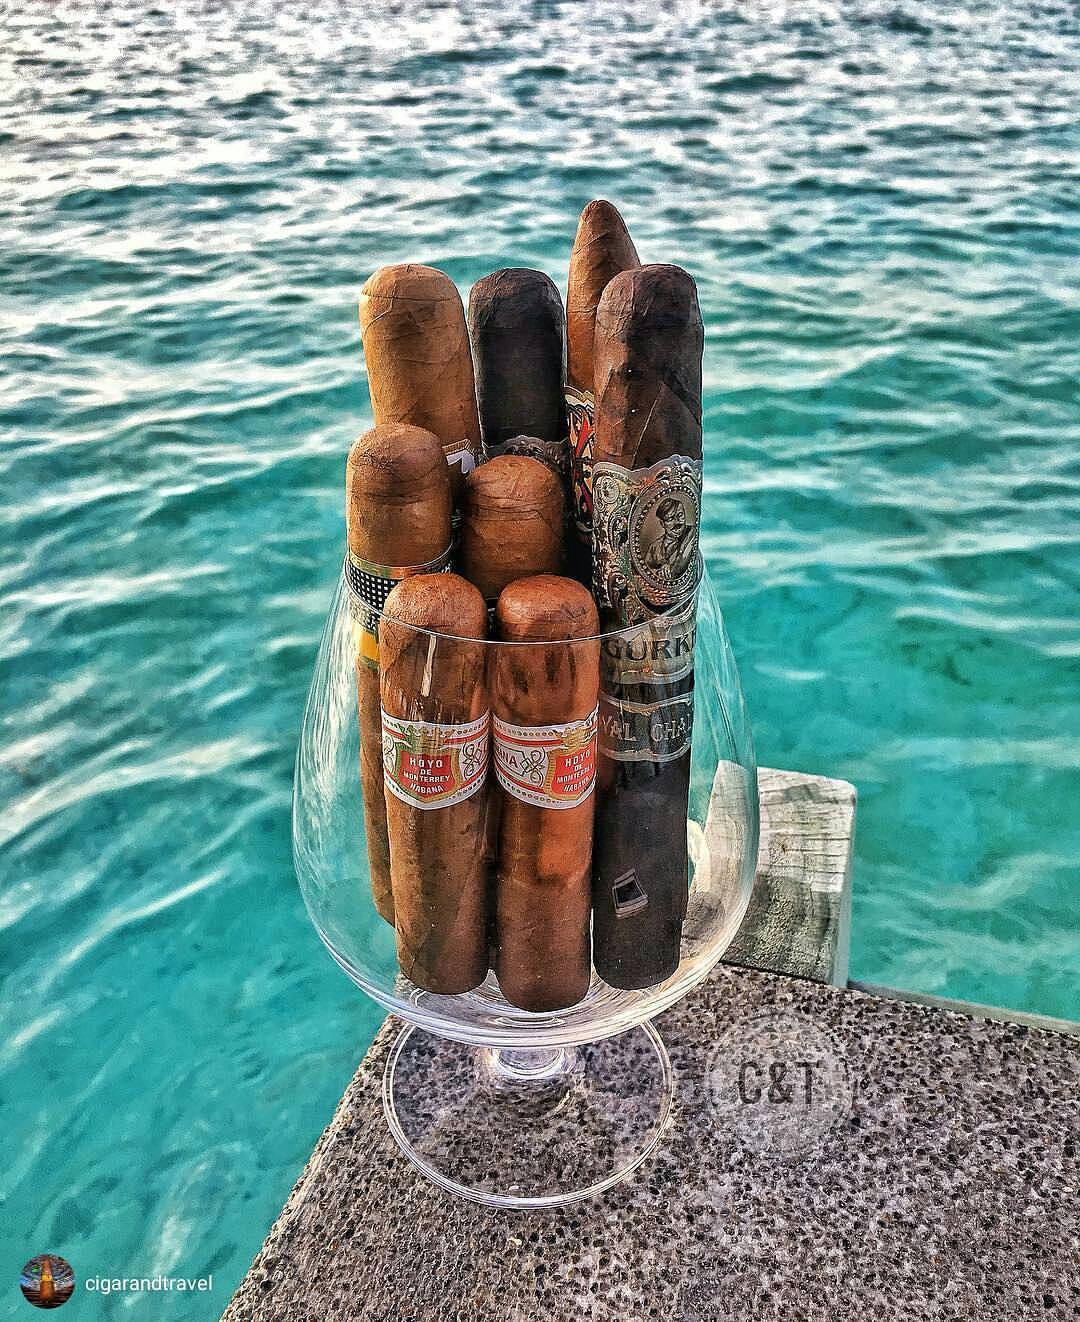 For your Monday blues! 🔥💨🌊
#Repost 📸 from @cigarandtravel
WWW.CIGARSANDWHISKEYS.COM
Like 👍, Repost 🔃, Tag 🔖 Follow 👣 Us & Subscribe ✍ on👇:...